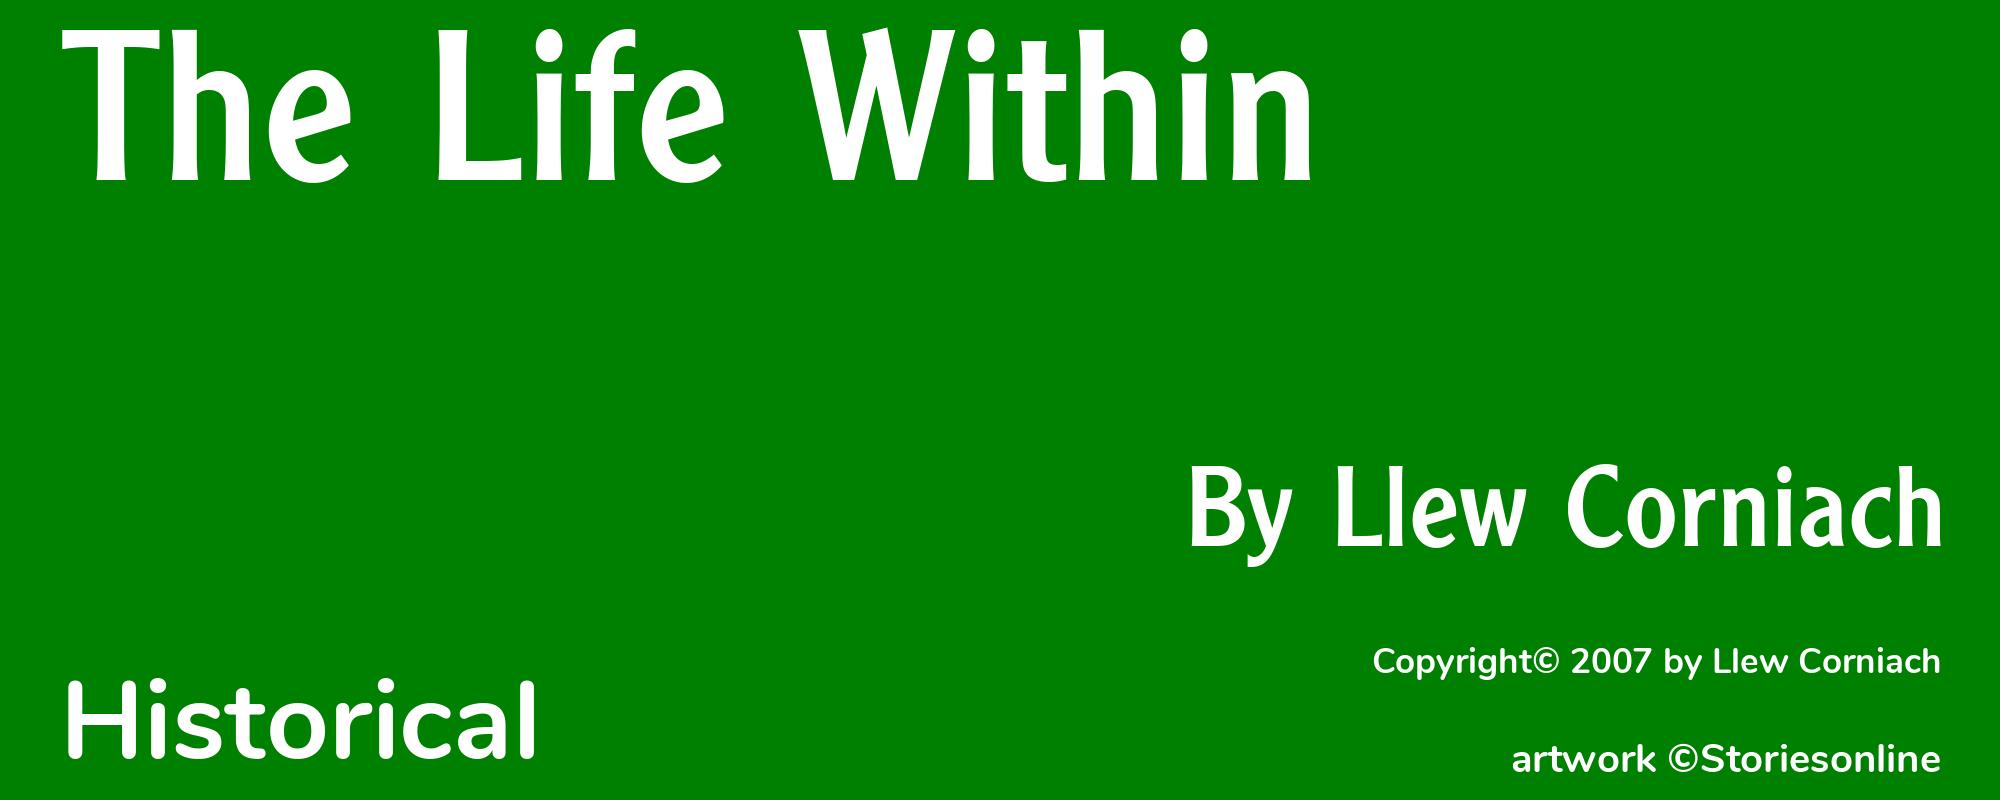 The Life Within - Cover